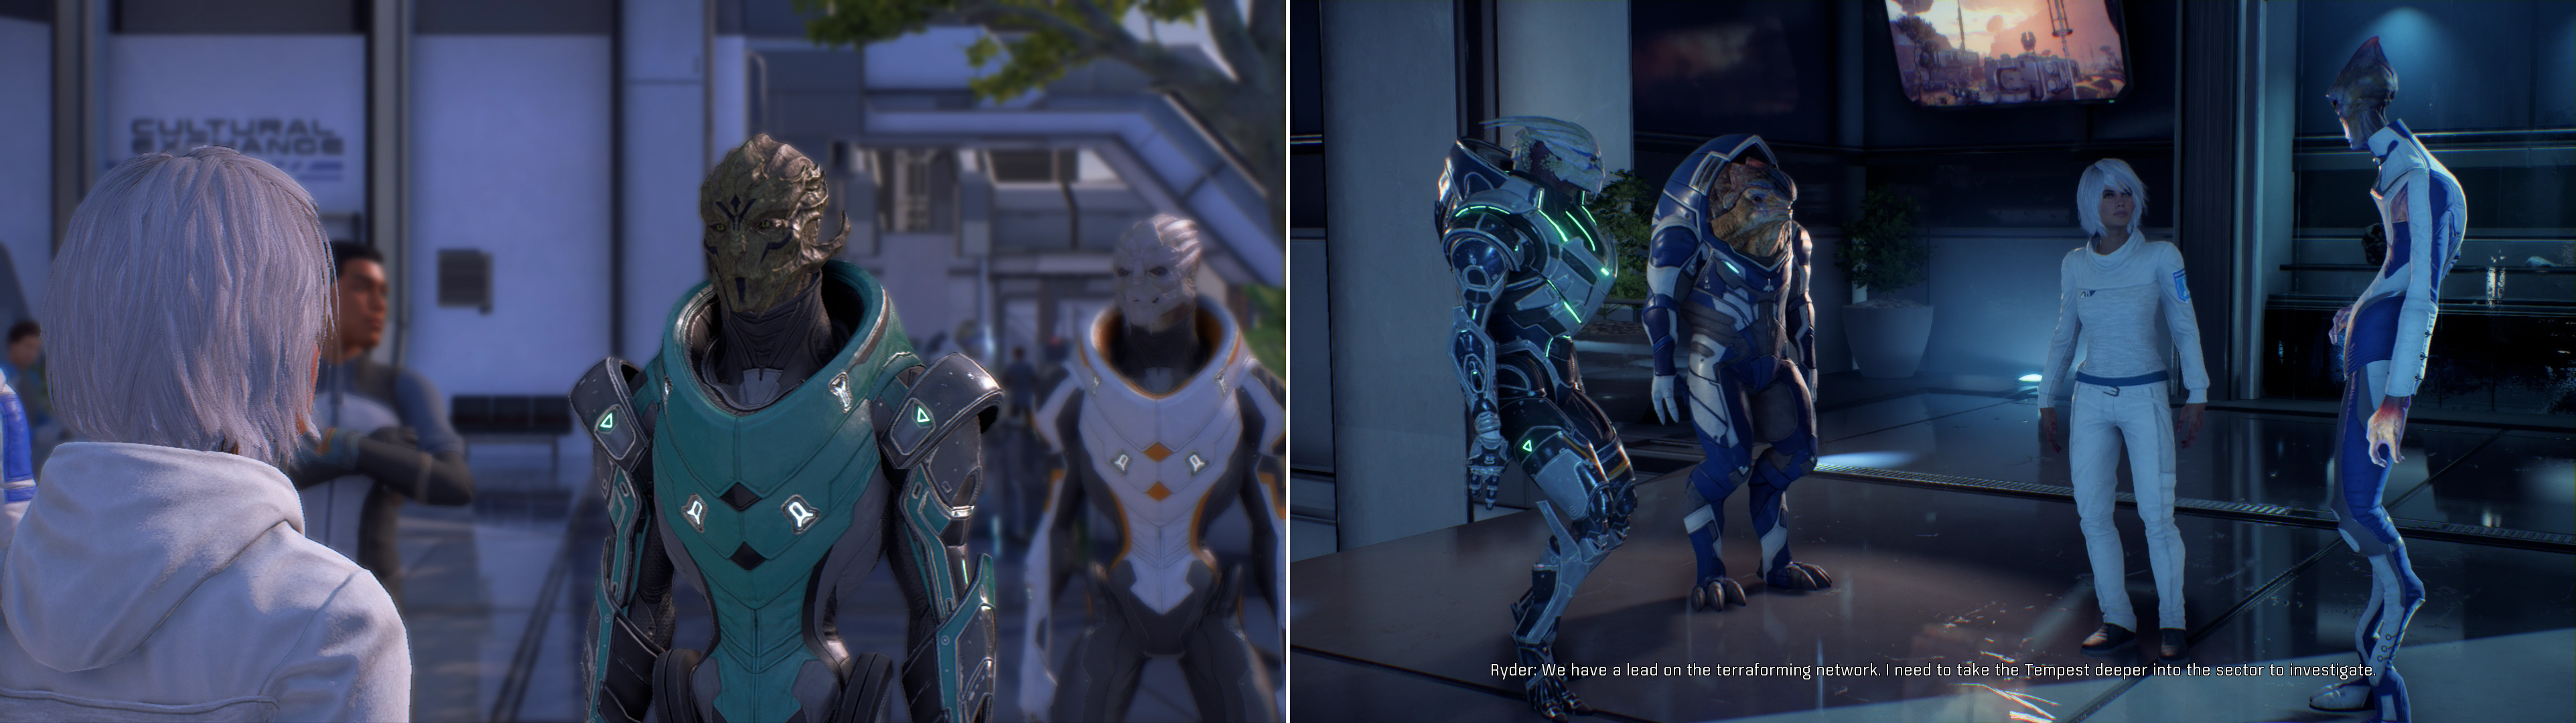 Youll be warmly welcomed by eager colonists back on the Nexus (left). Be sure to meet with the Nexus leaders and tell them about what you found on Eos (right).